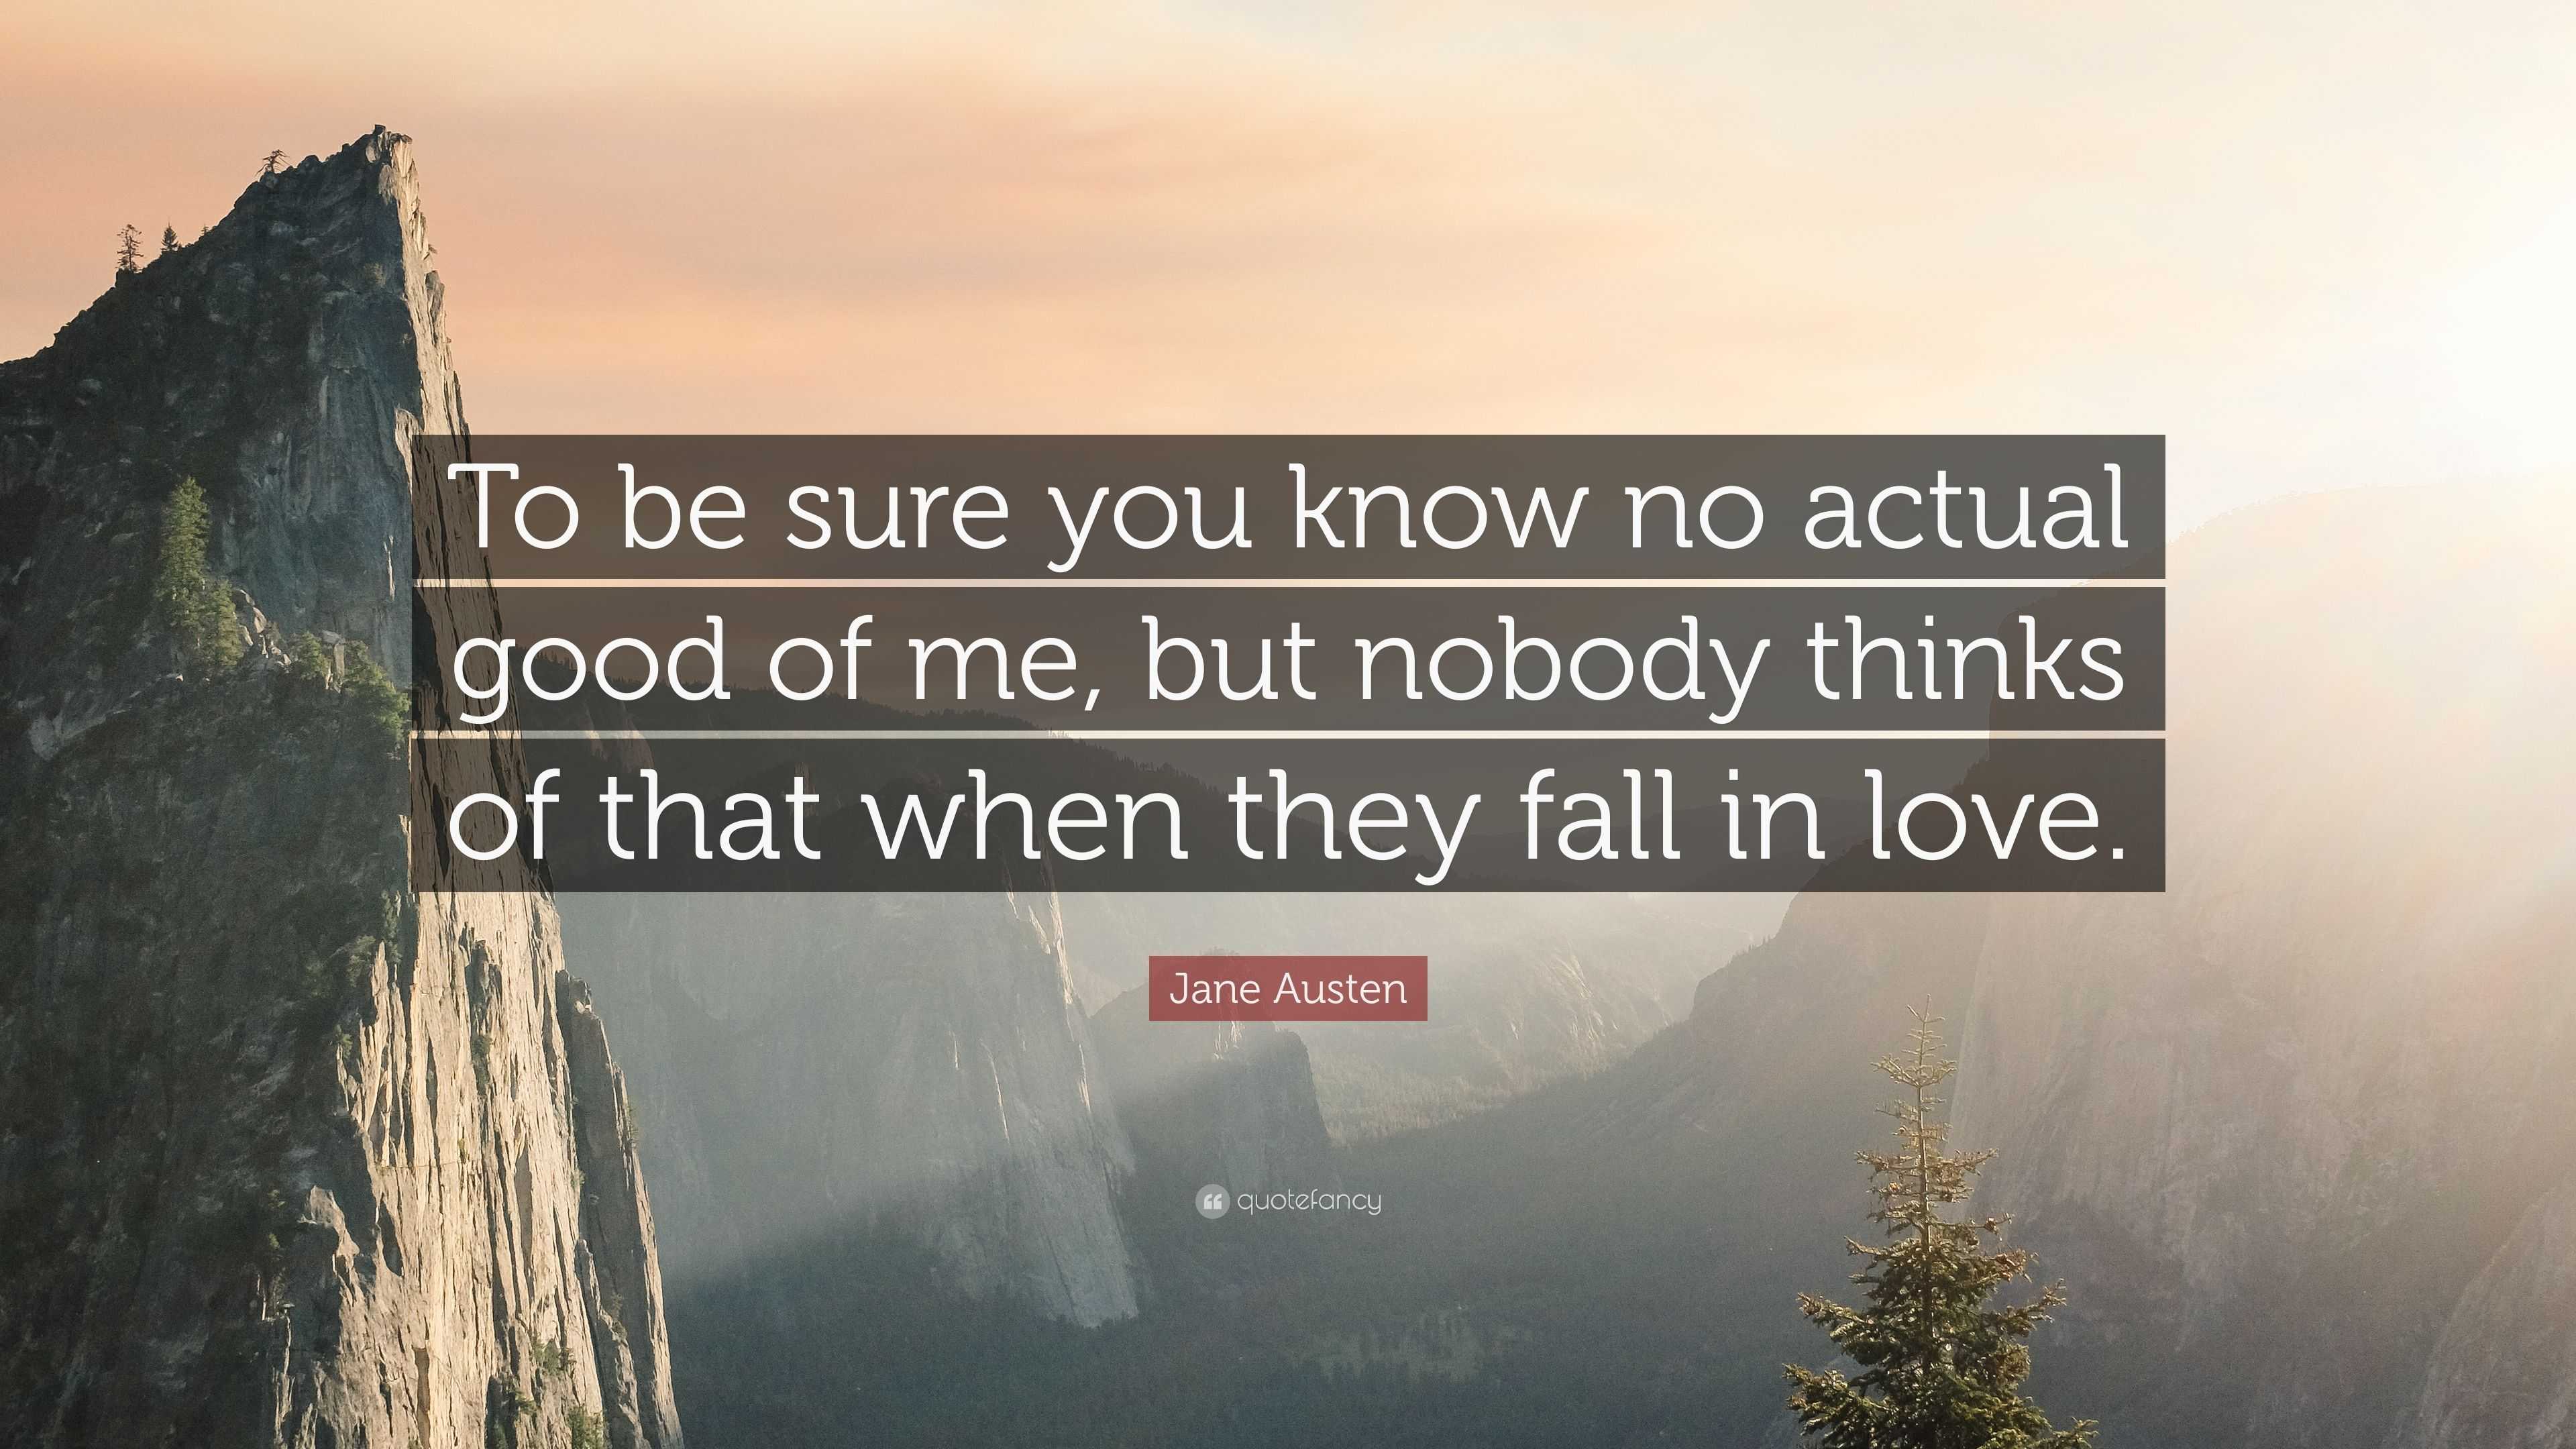 Jane Austen Quote: “To be sure you know no actual good of me, but ...